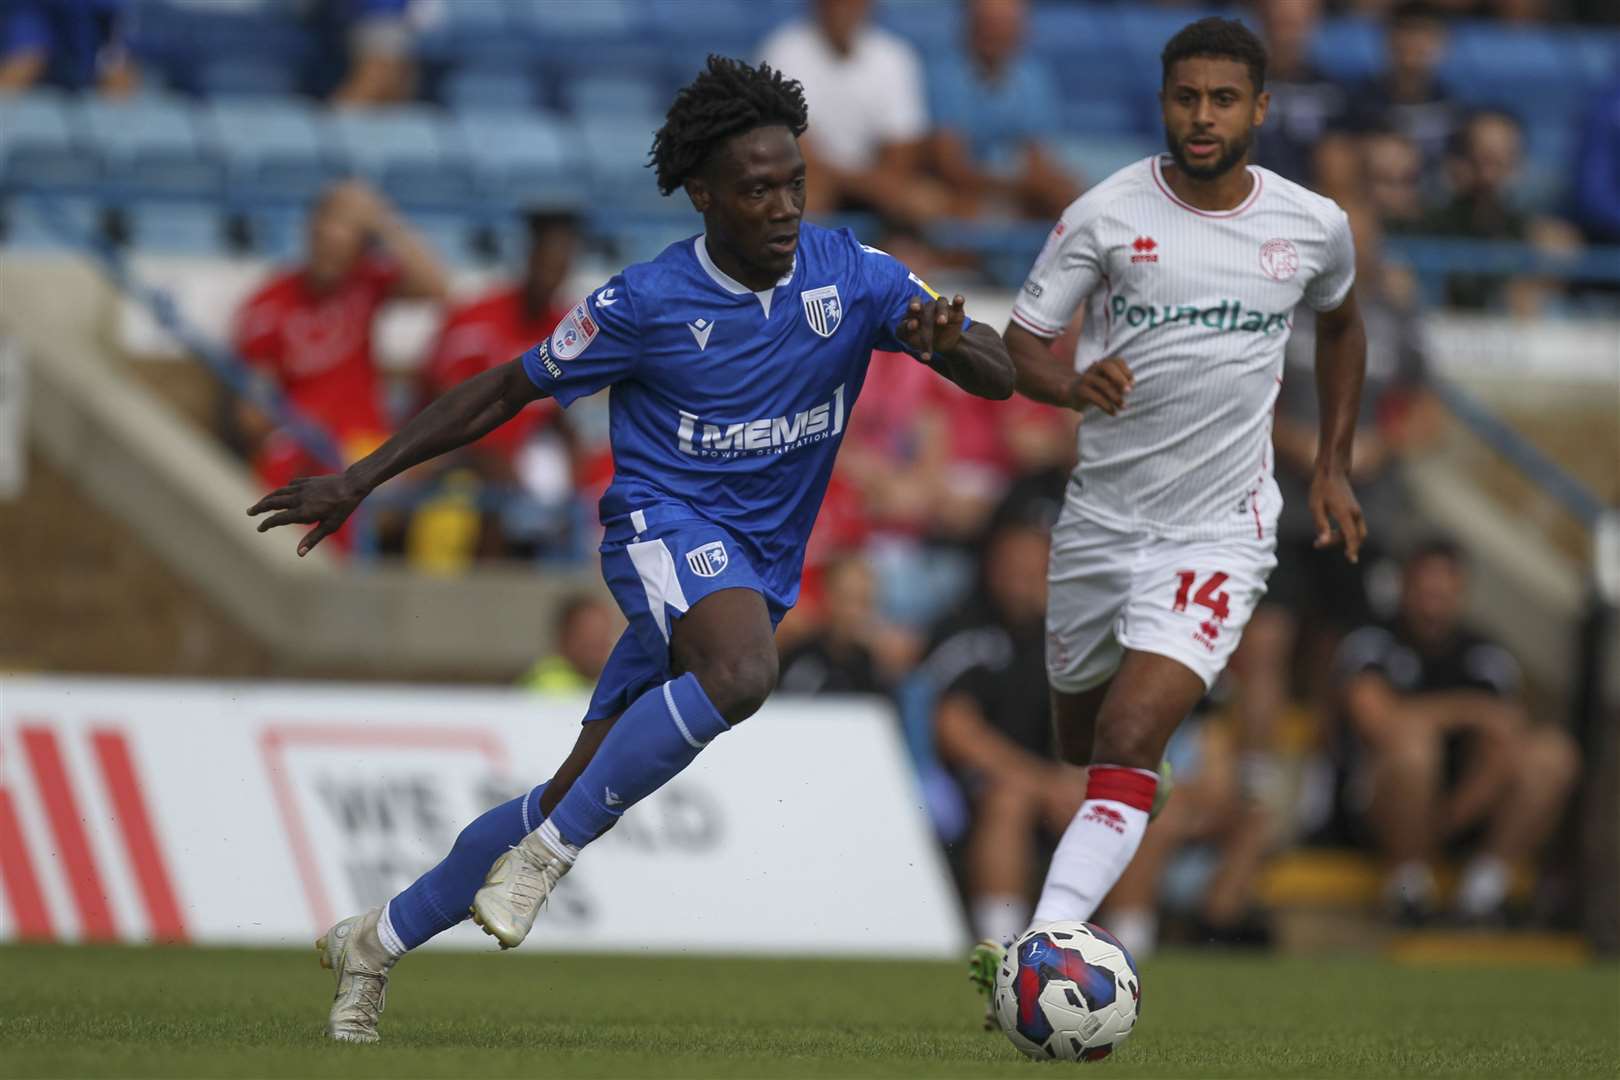 Jordan Green hasn't played for Gillingham since the Boxing Day match against Colchester United